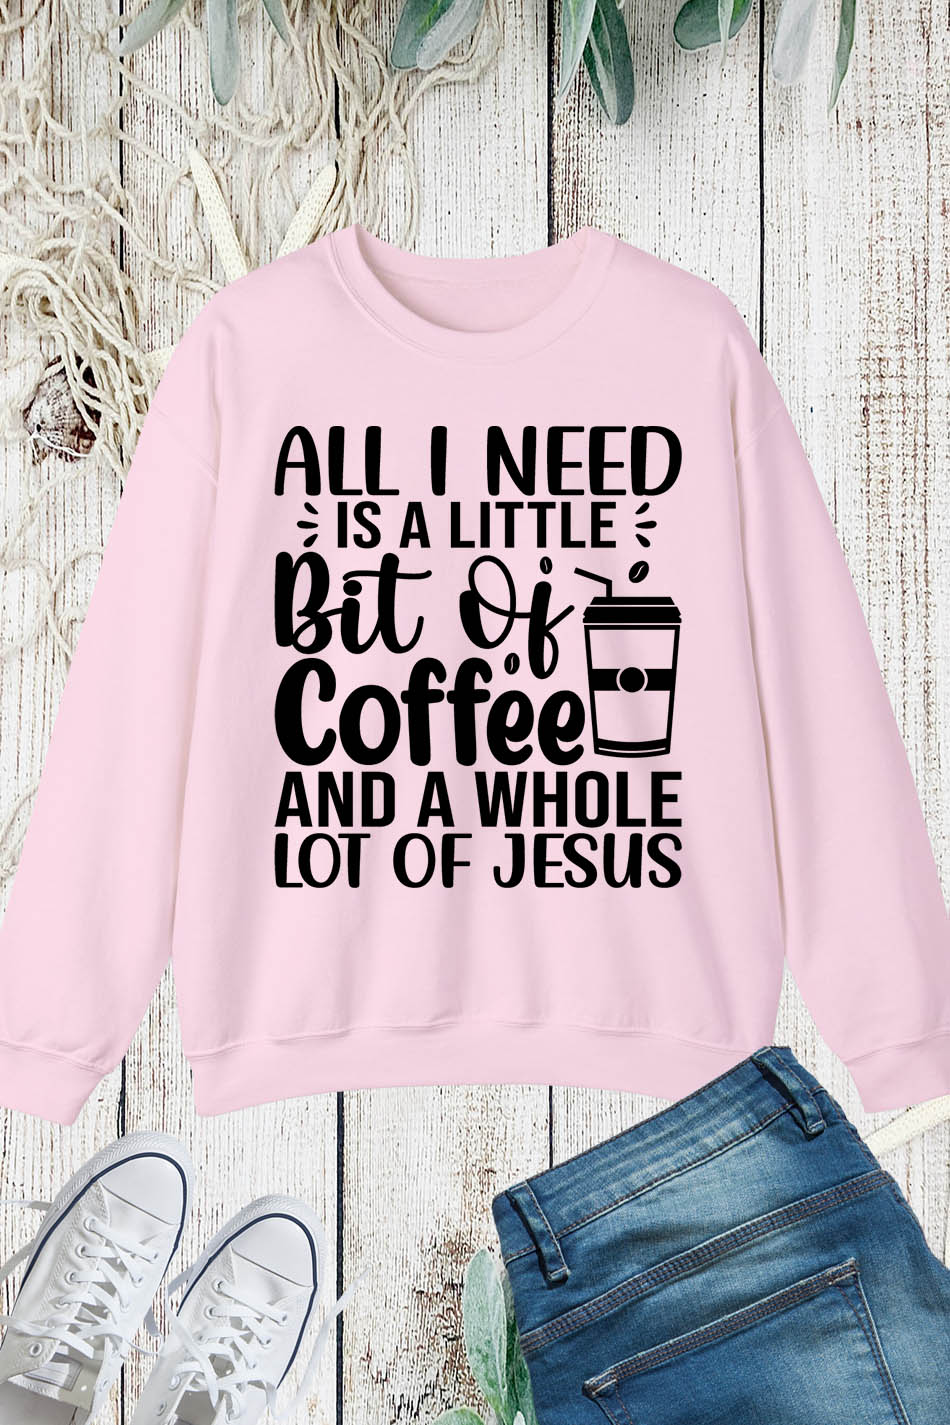 All I Need is a Little Bit of Coffee and Jesus Christian Sweatshirts